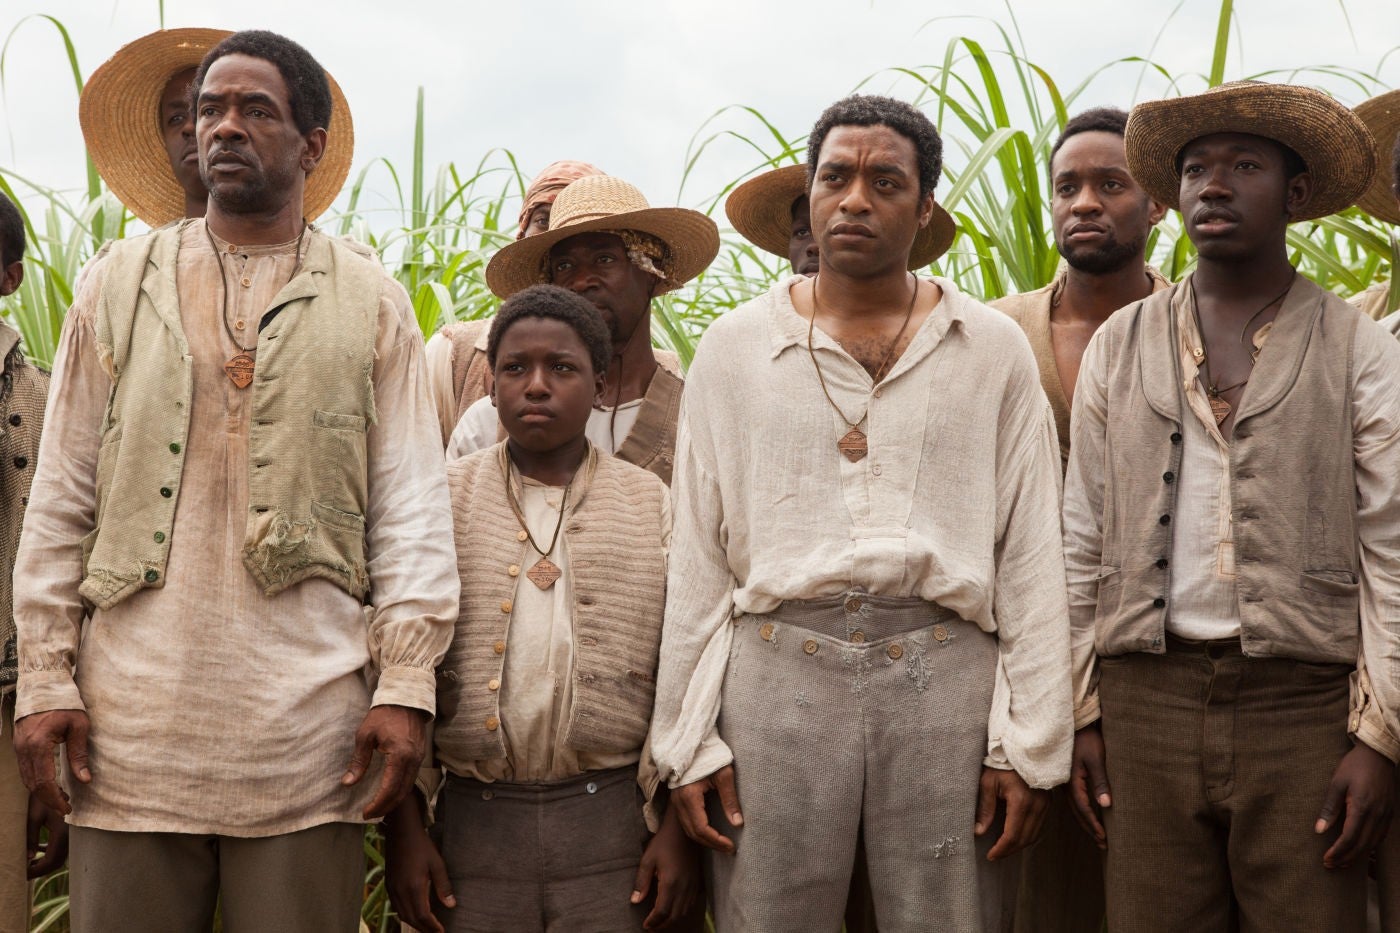 Chiwetel Ejiofor stars as kidnapped slave Solomon Northup in 12 Years a Slave